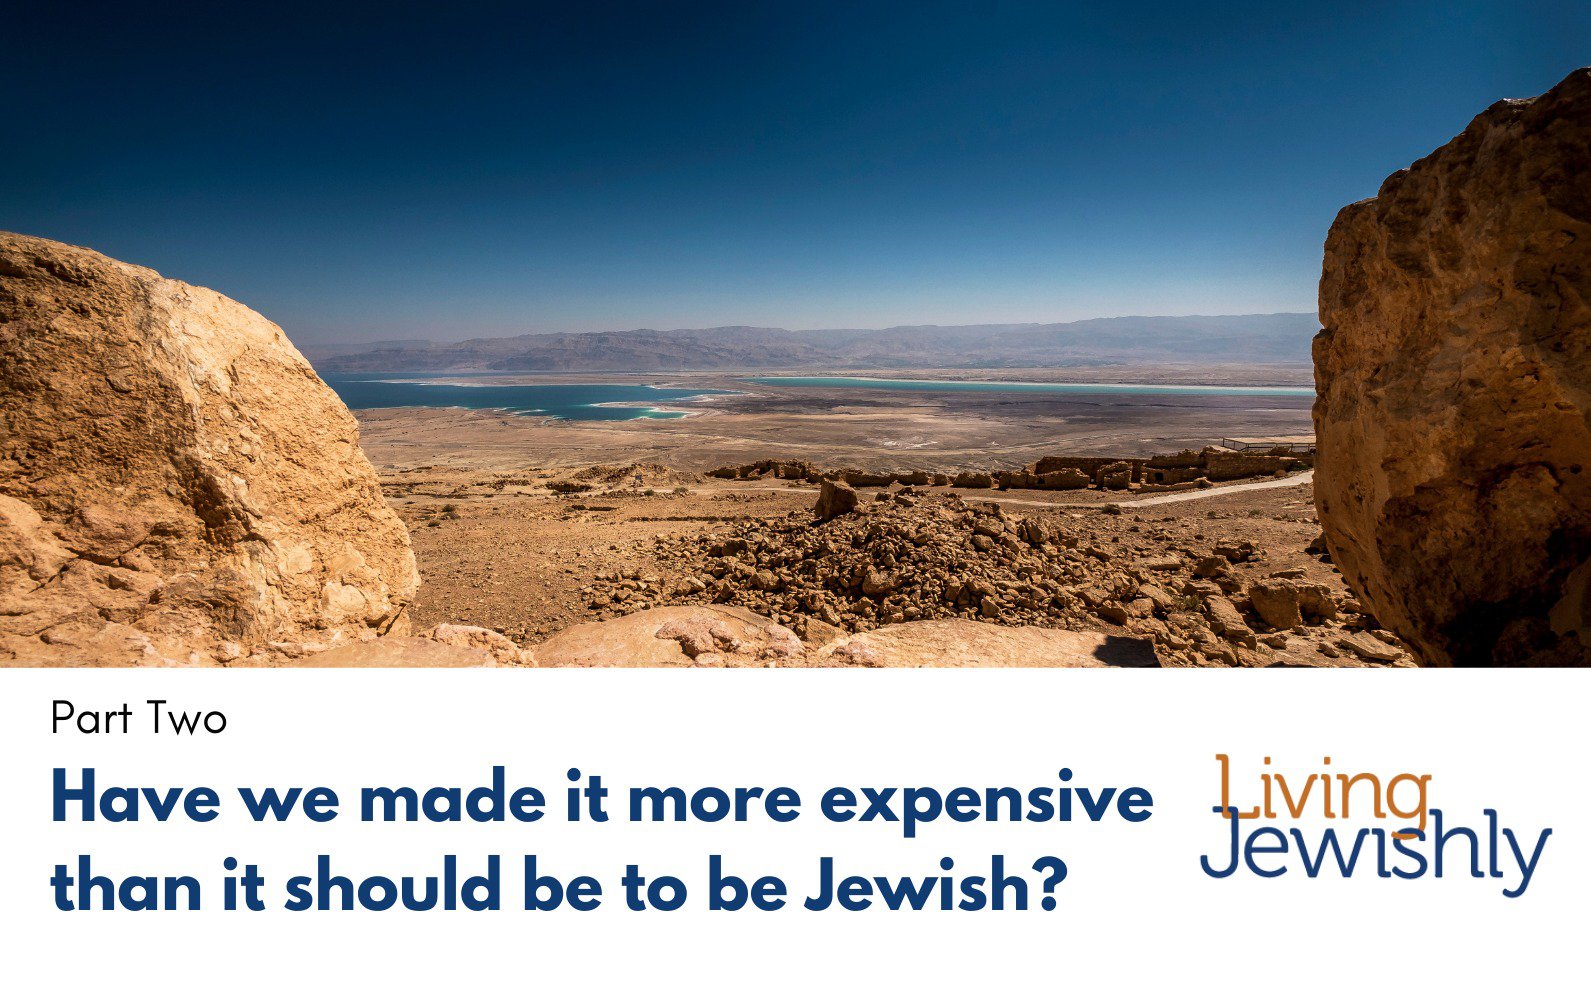 Have we made it more expensive than it should be to be Jewish? - Part Two